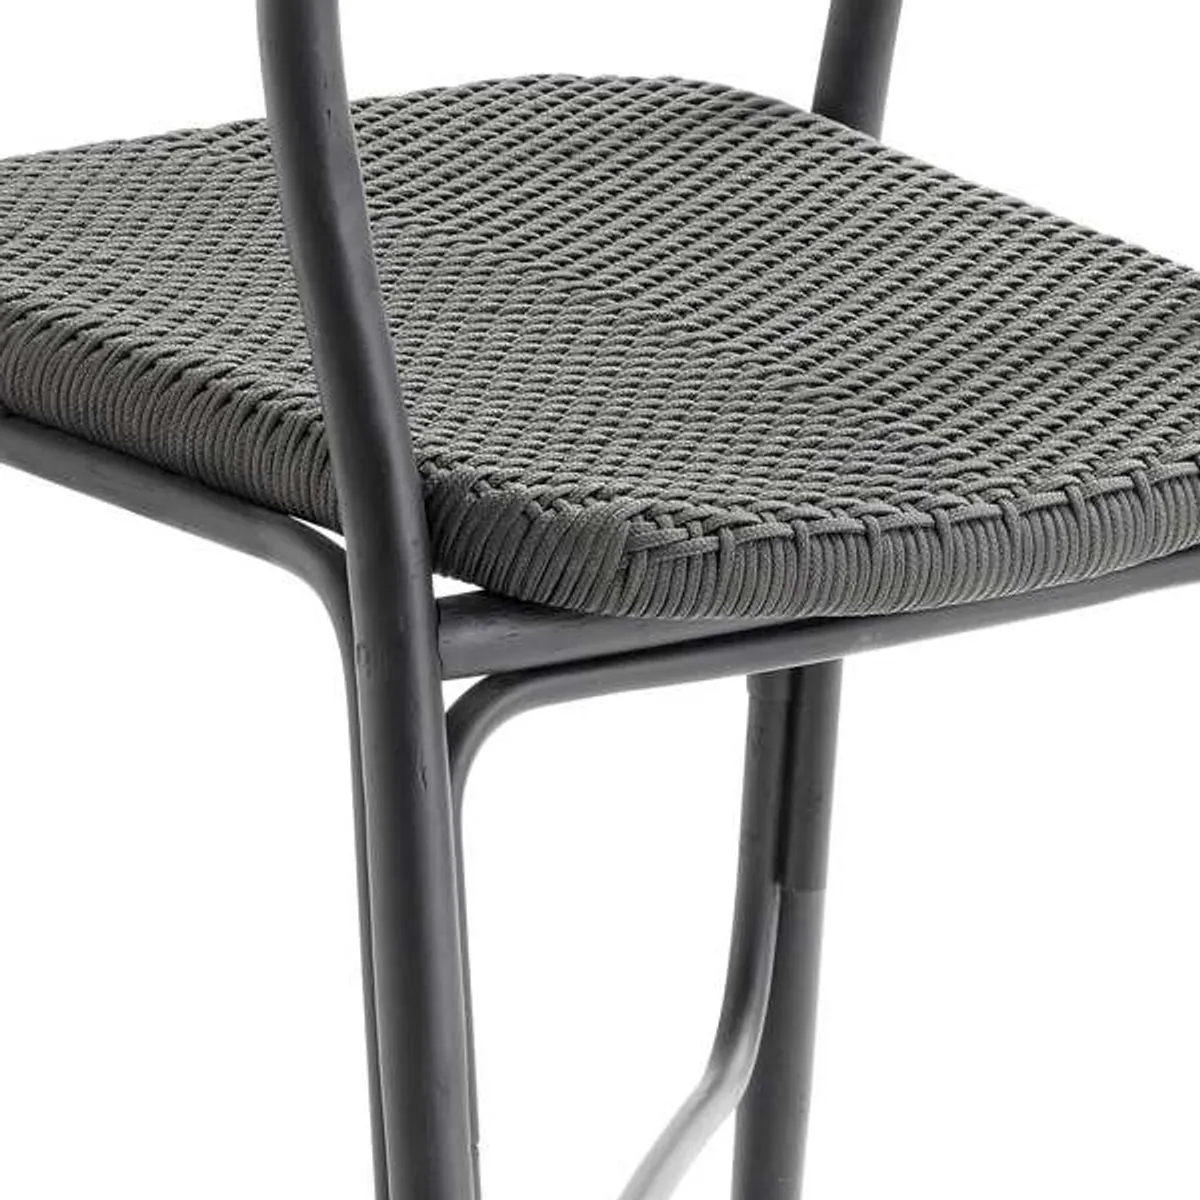 Paxton Rattan Chair Ropewoven Seat Detail Inside Out Contracts